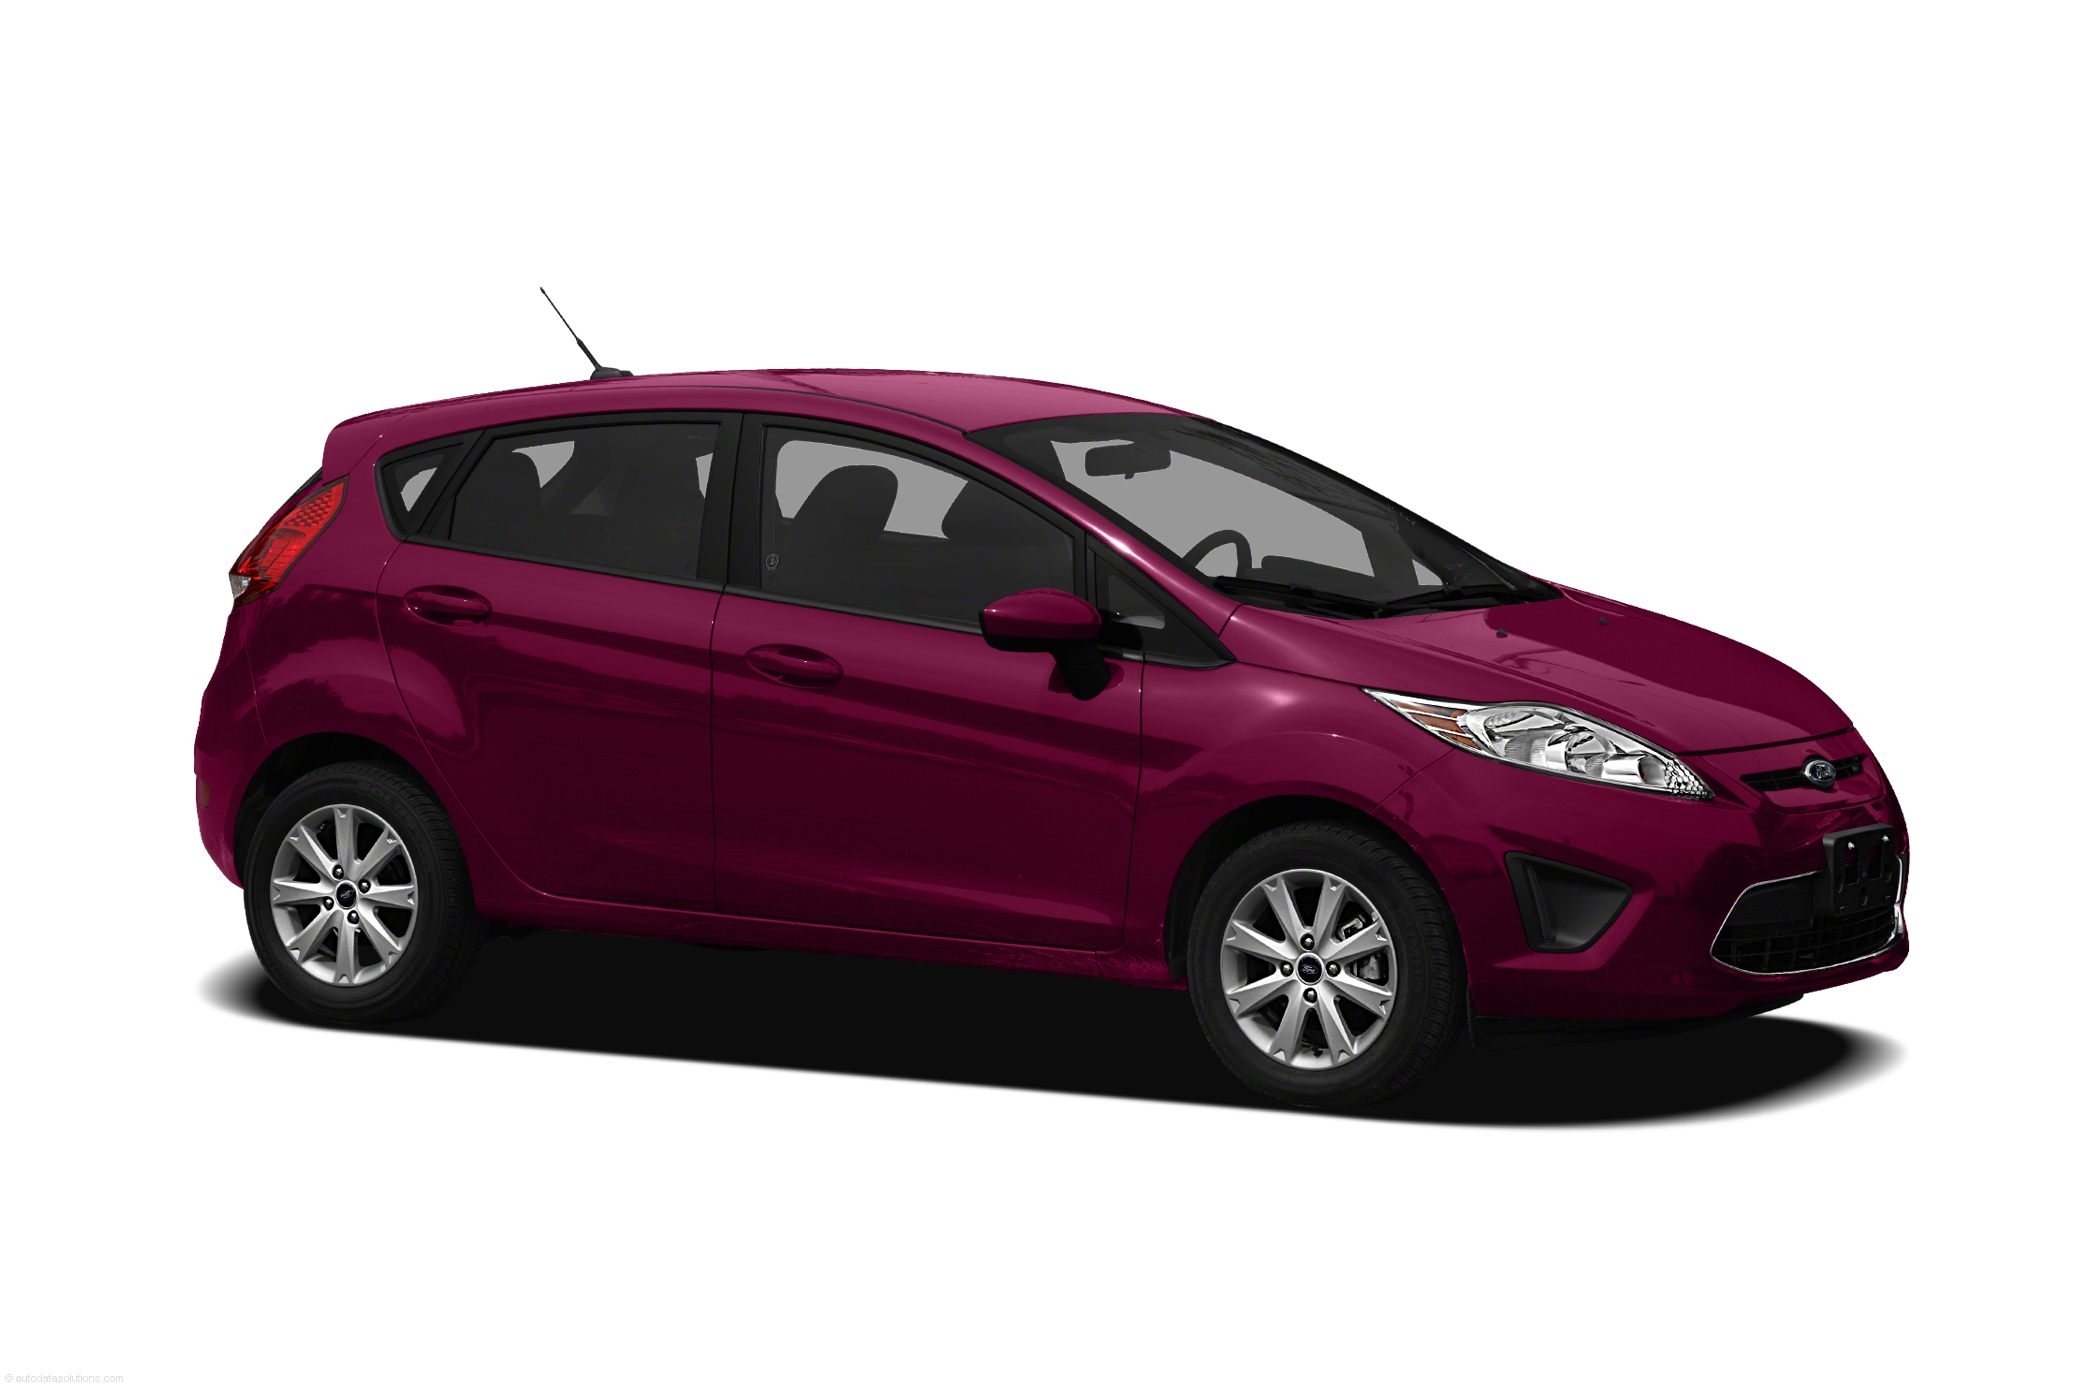 2015 ford fiesta security features cars reviews photos specs ford fiesta invoice price